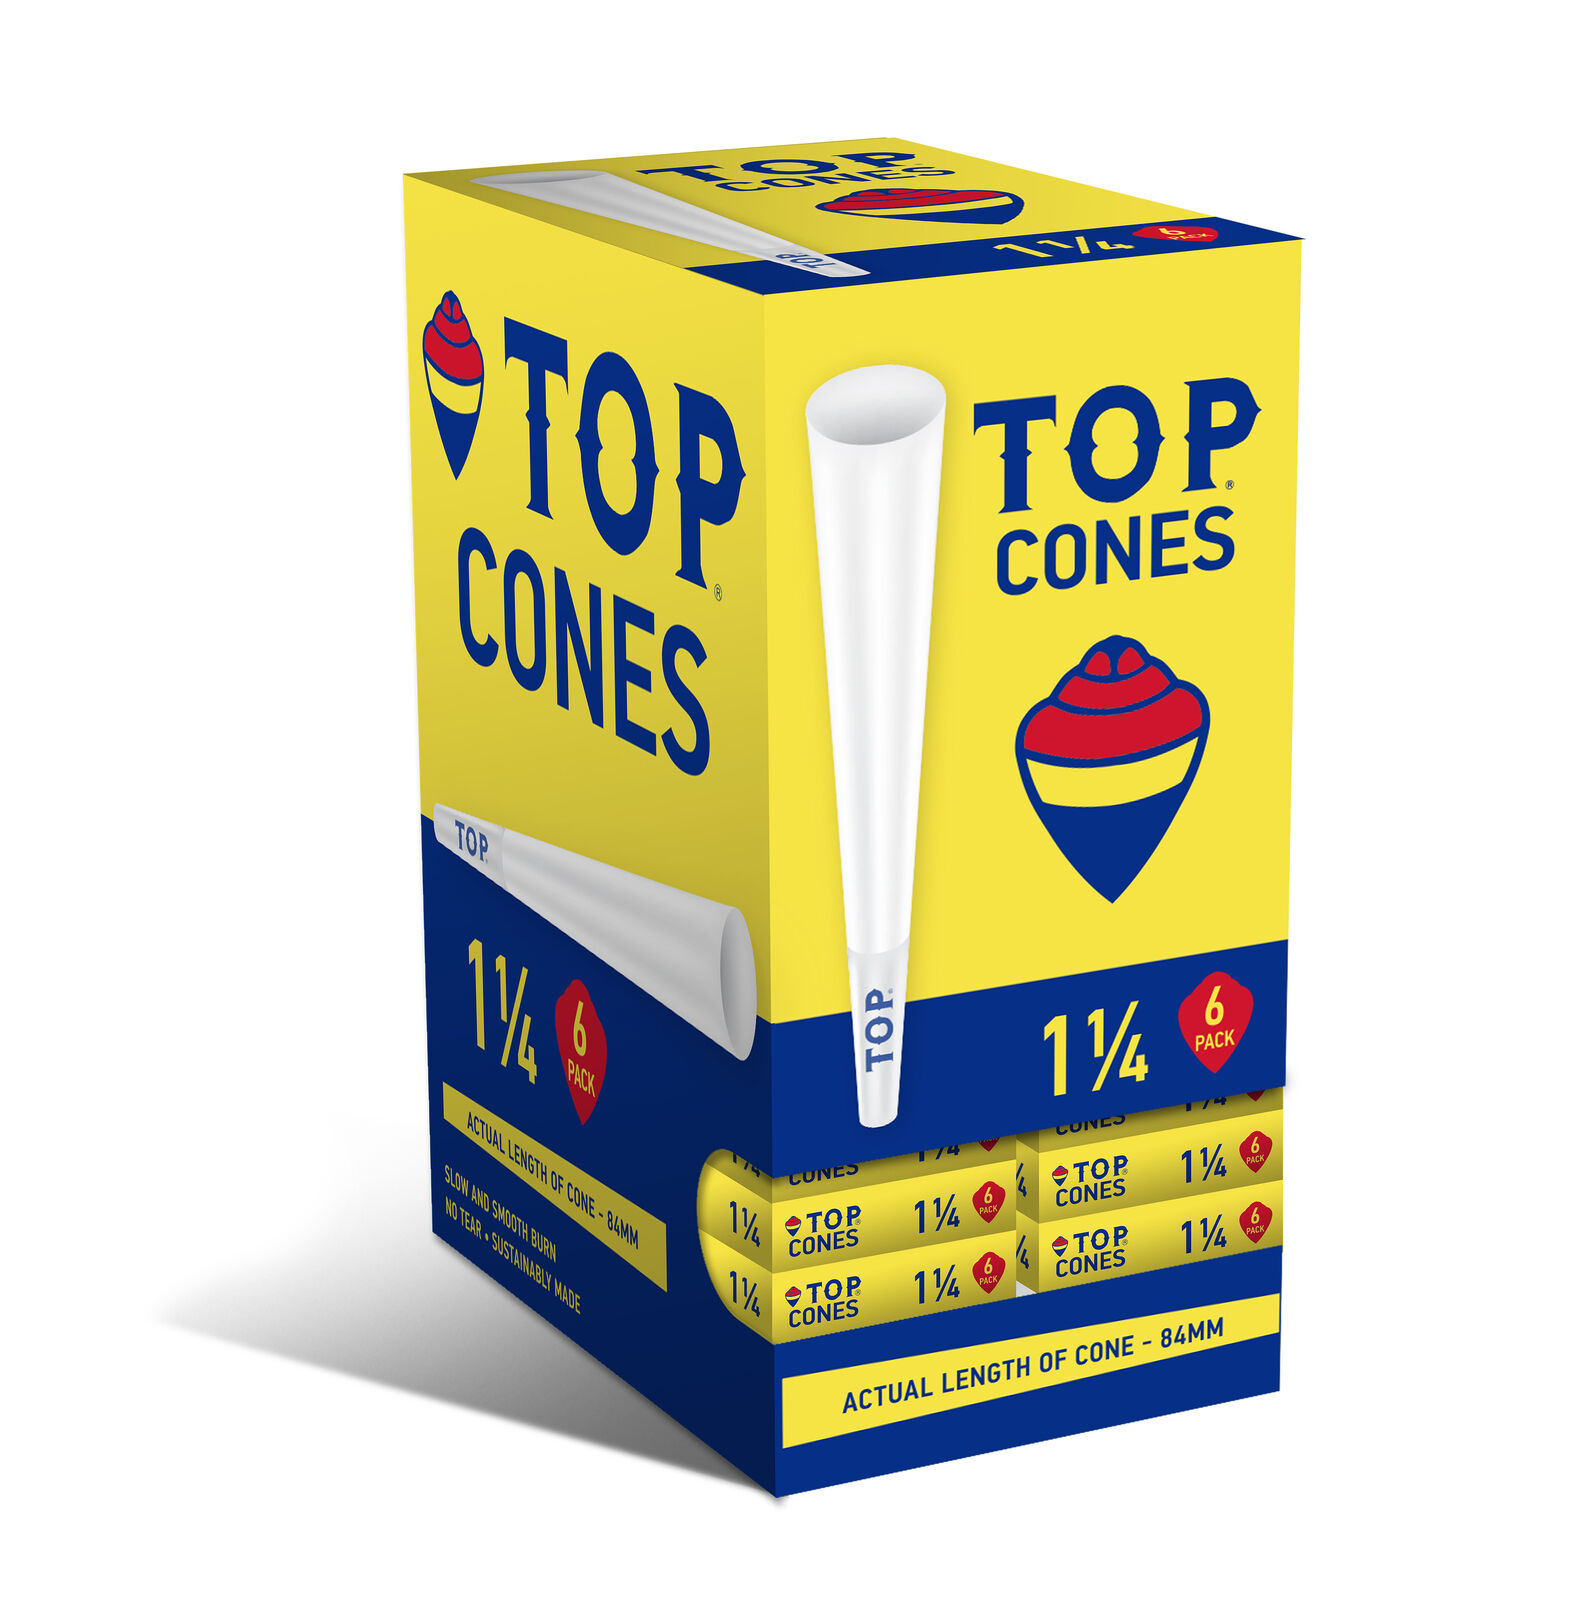 FULL BOX NEW TOP Pre Rolled Paper Cones 1 1/4 84mm Size - 24 Packs of 6 Cones